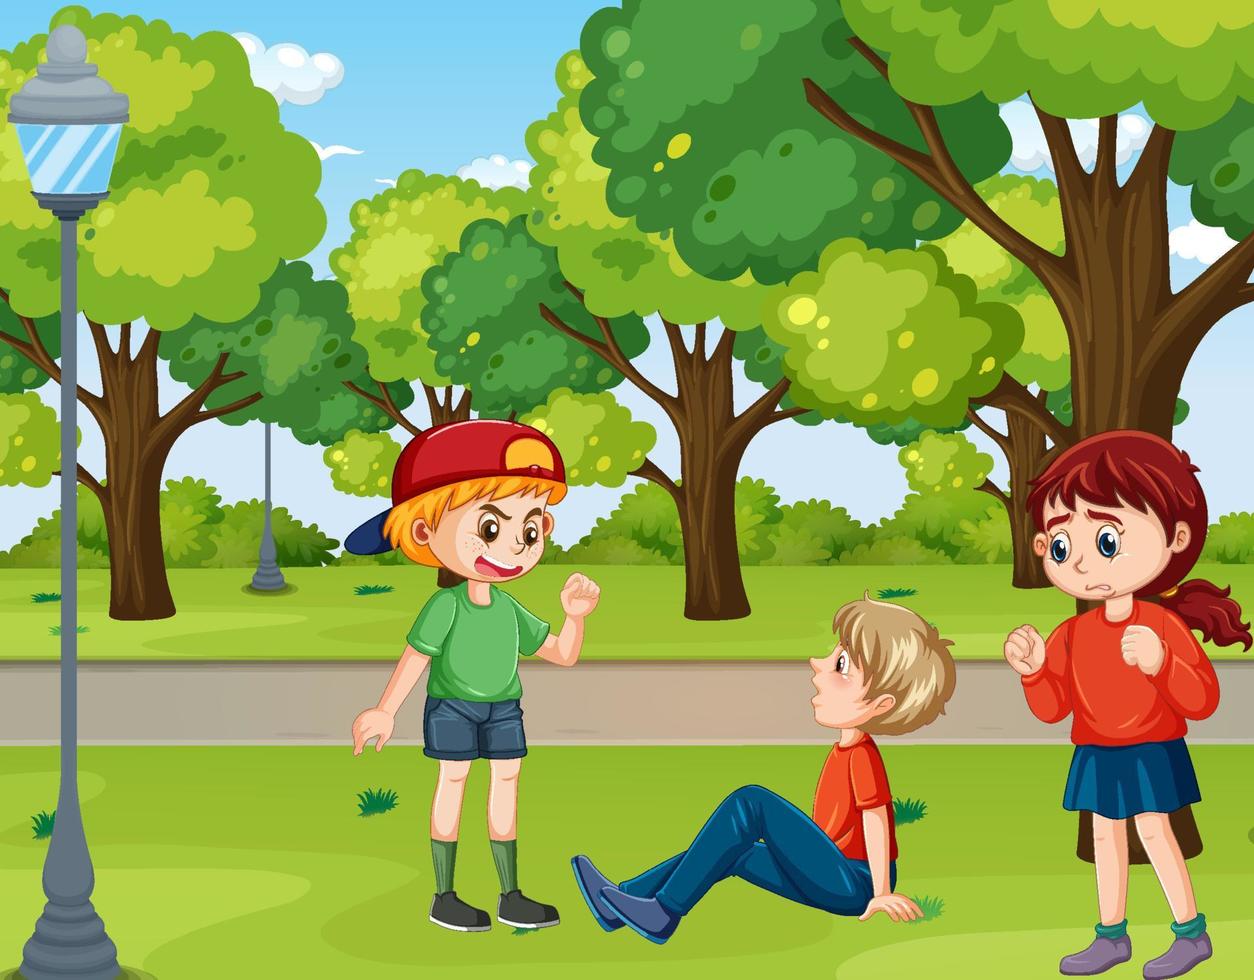 School bullying with student cartoon characters vector